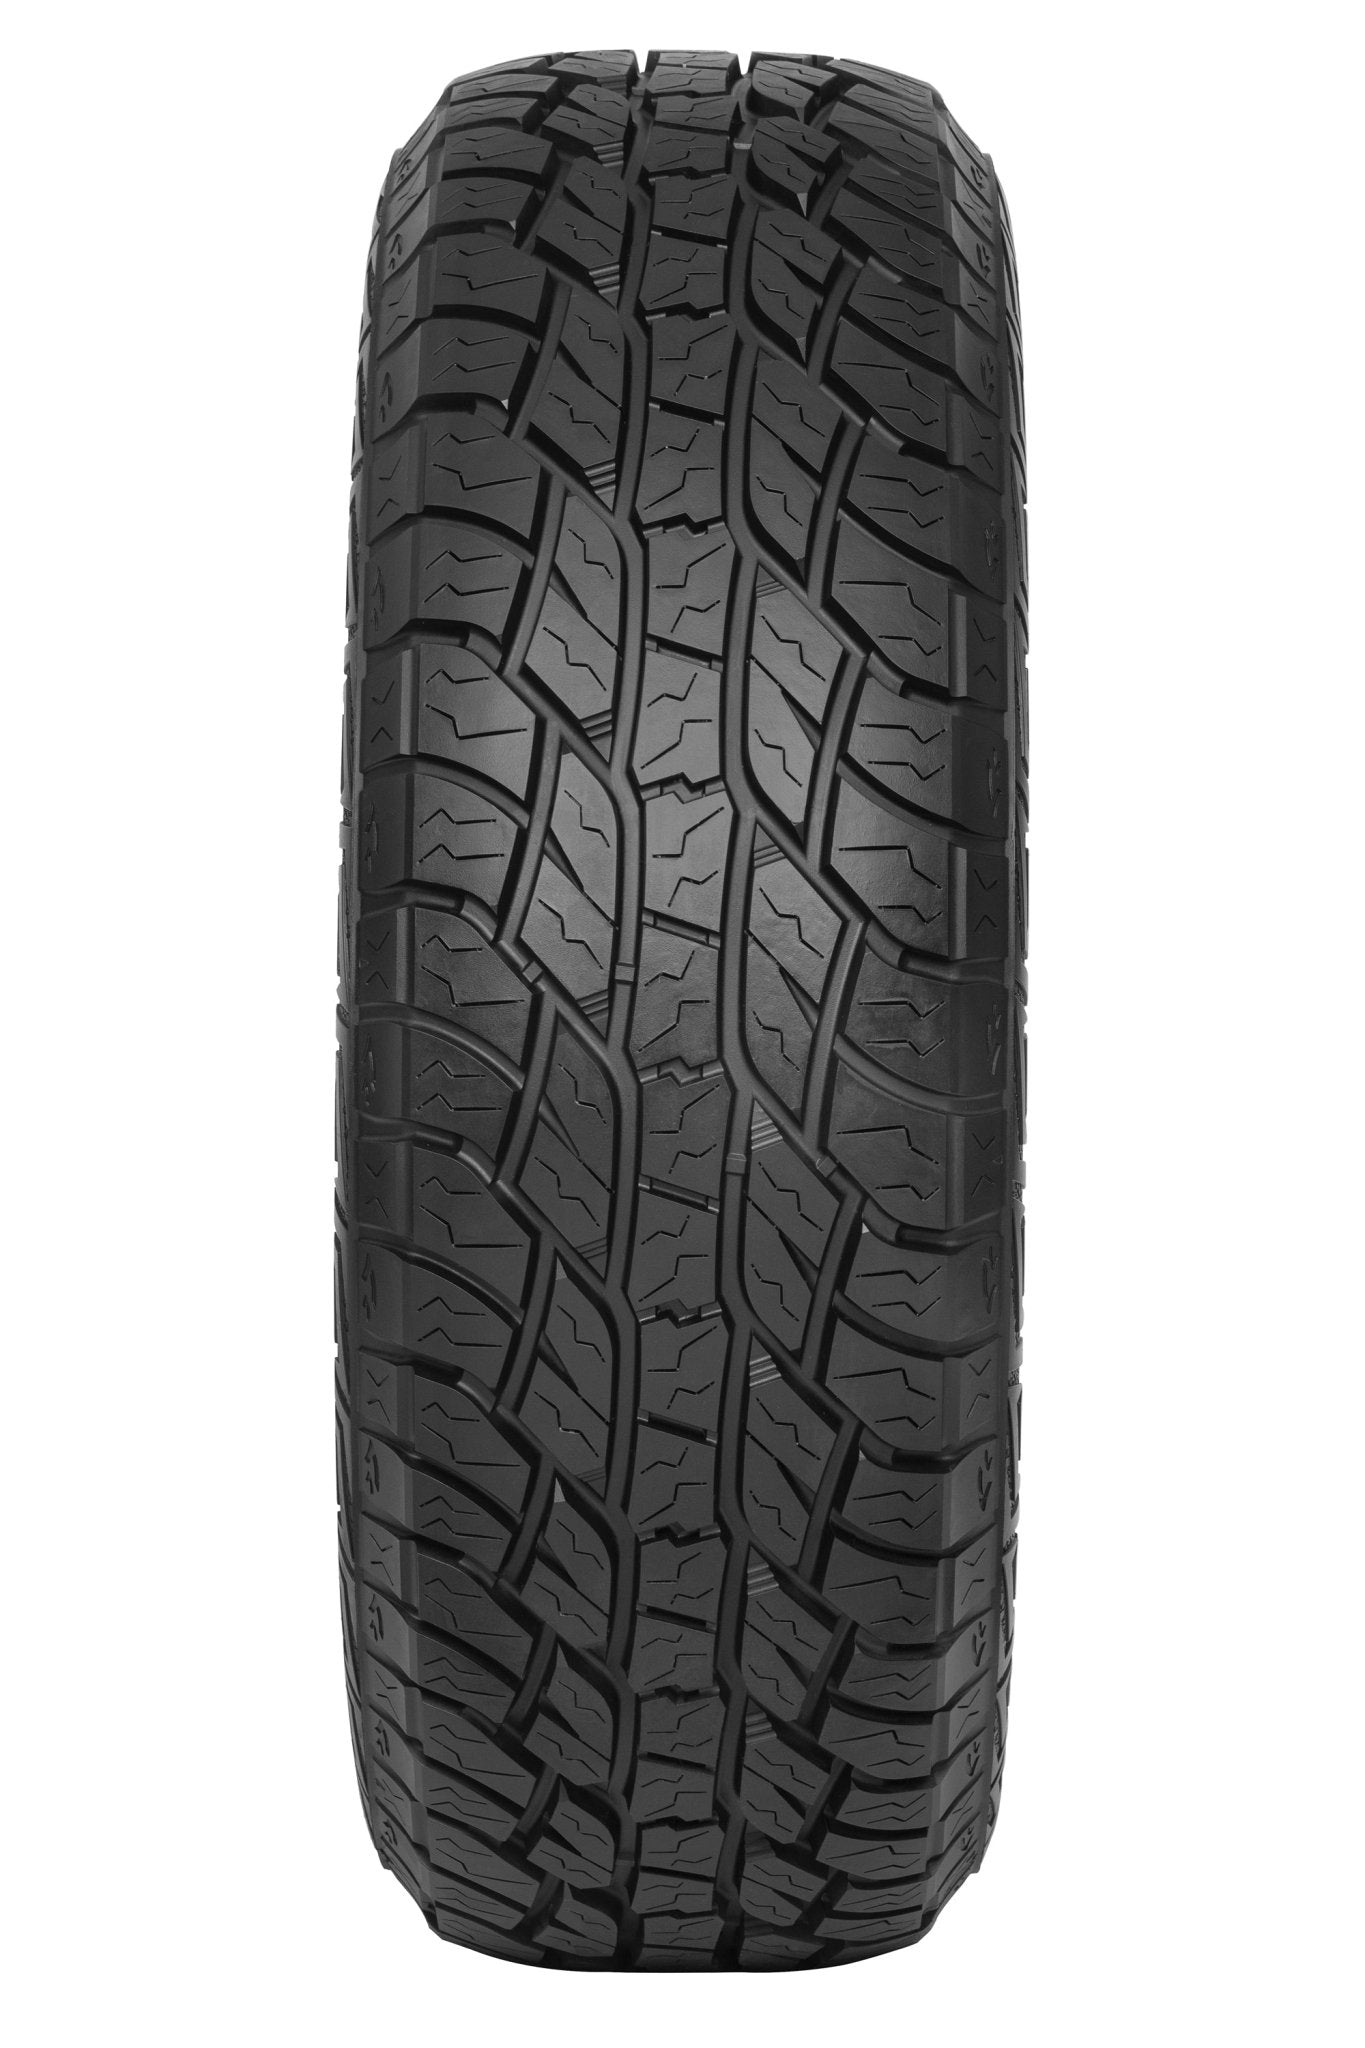 275/55R20 GRENLANDER MAGA A/T TWO PASSENGER - Toee Tire